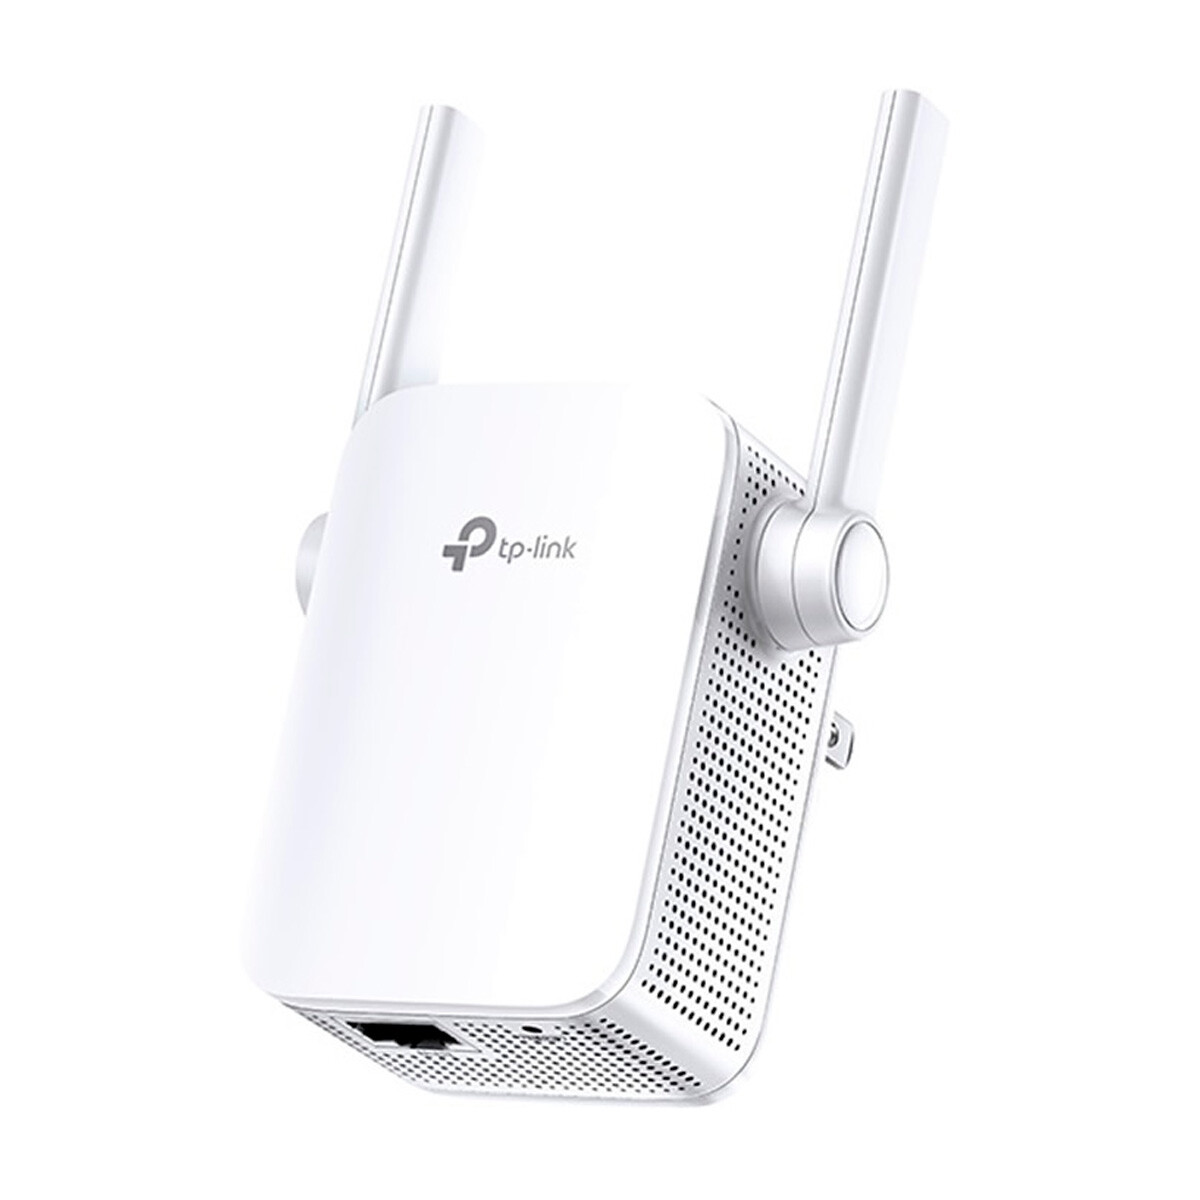 Access Point, Repetidor Tp-link Tl-wa855re Blanco 